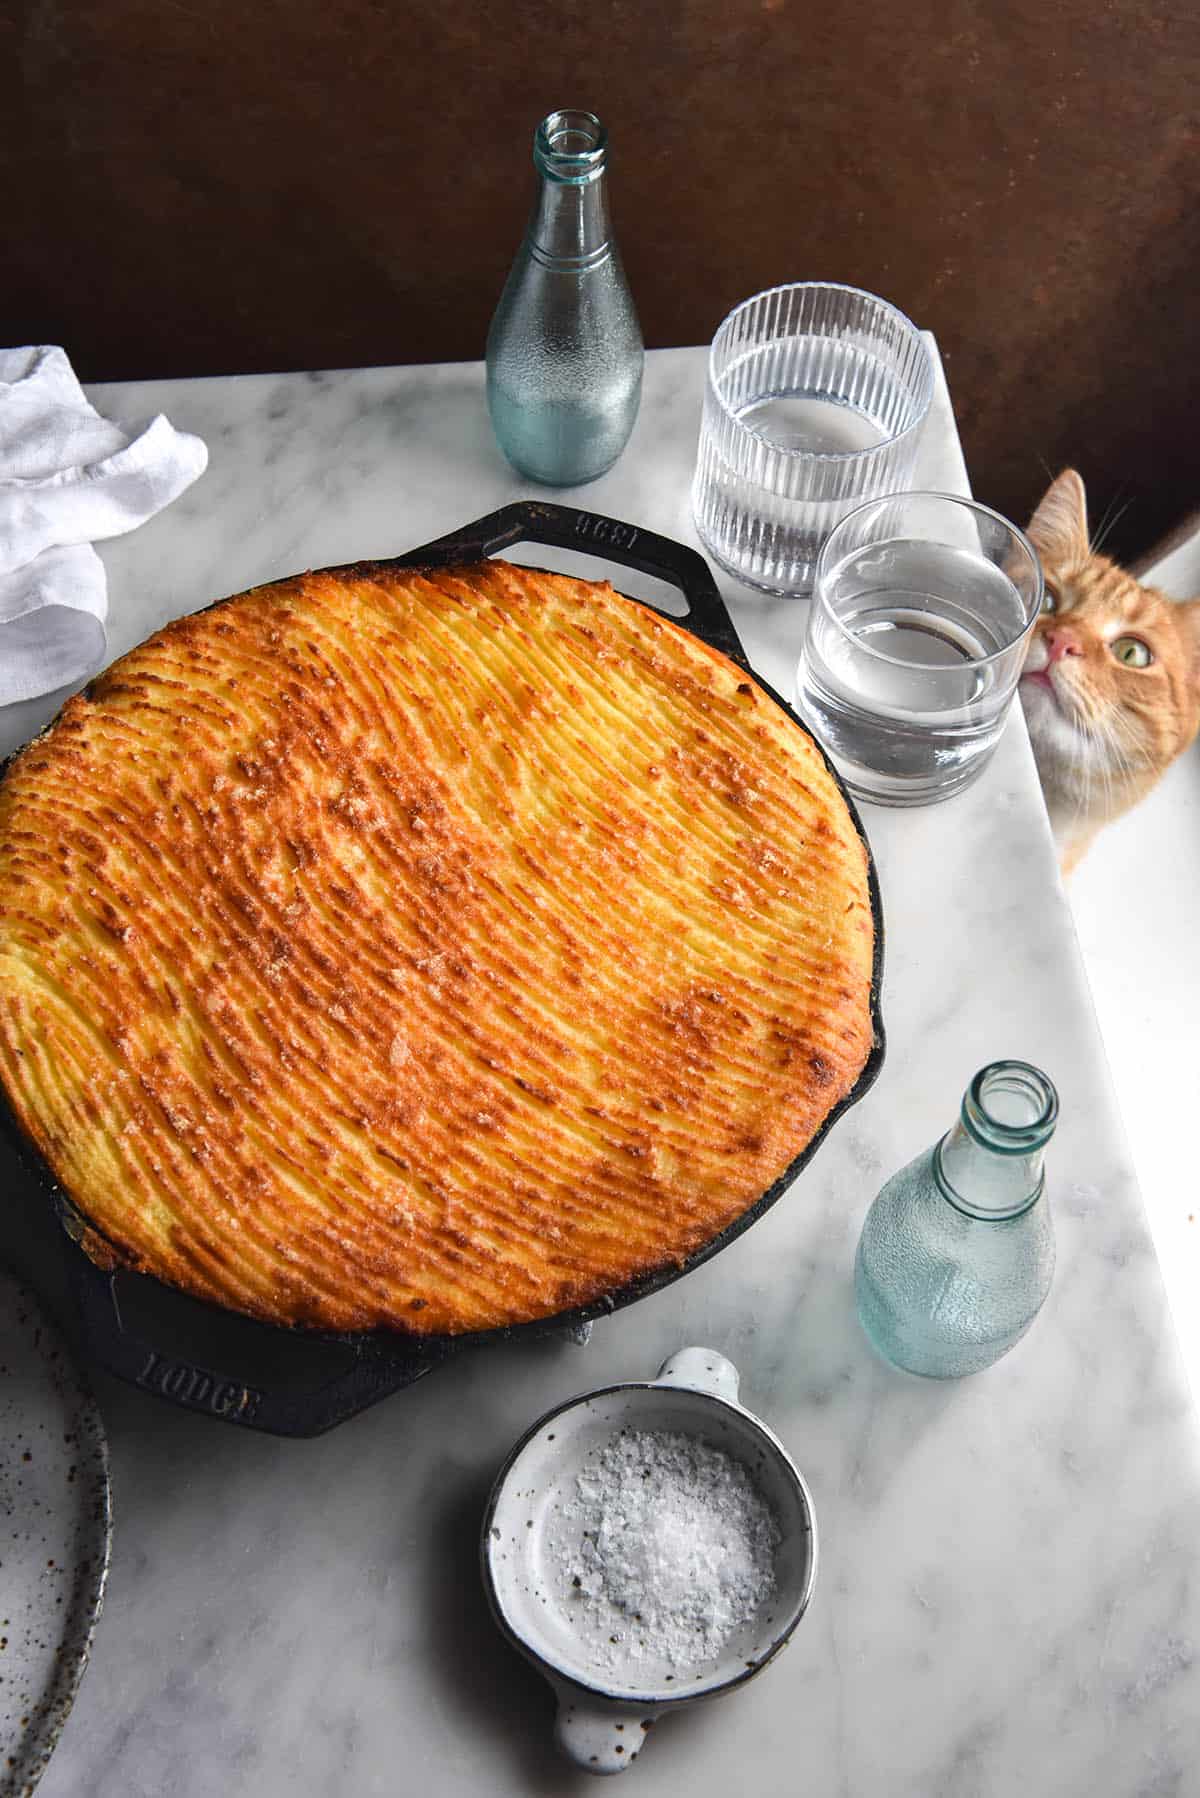 A side on view of a FODMAP friendly vegetarian Shepherd's Pie baked in a skillet. The mashed potato topping is golden brown and has a wavy pattern traced in with fork prongs. It sits atop a white marble table and is surrounded by white ceramic plates, a small white ceramic salt dish and glasses of water. The background is a dark olive piece of linen. A ginger cat pokes his head out from under the table to the right of the image.